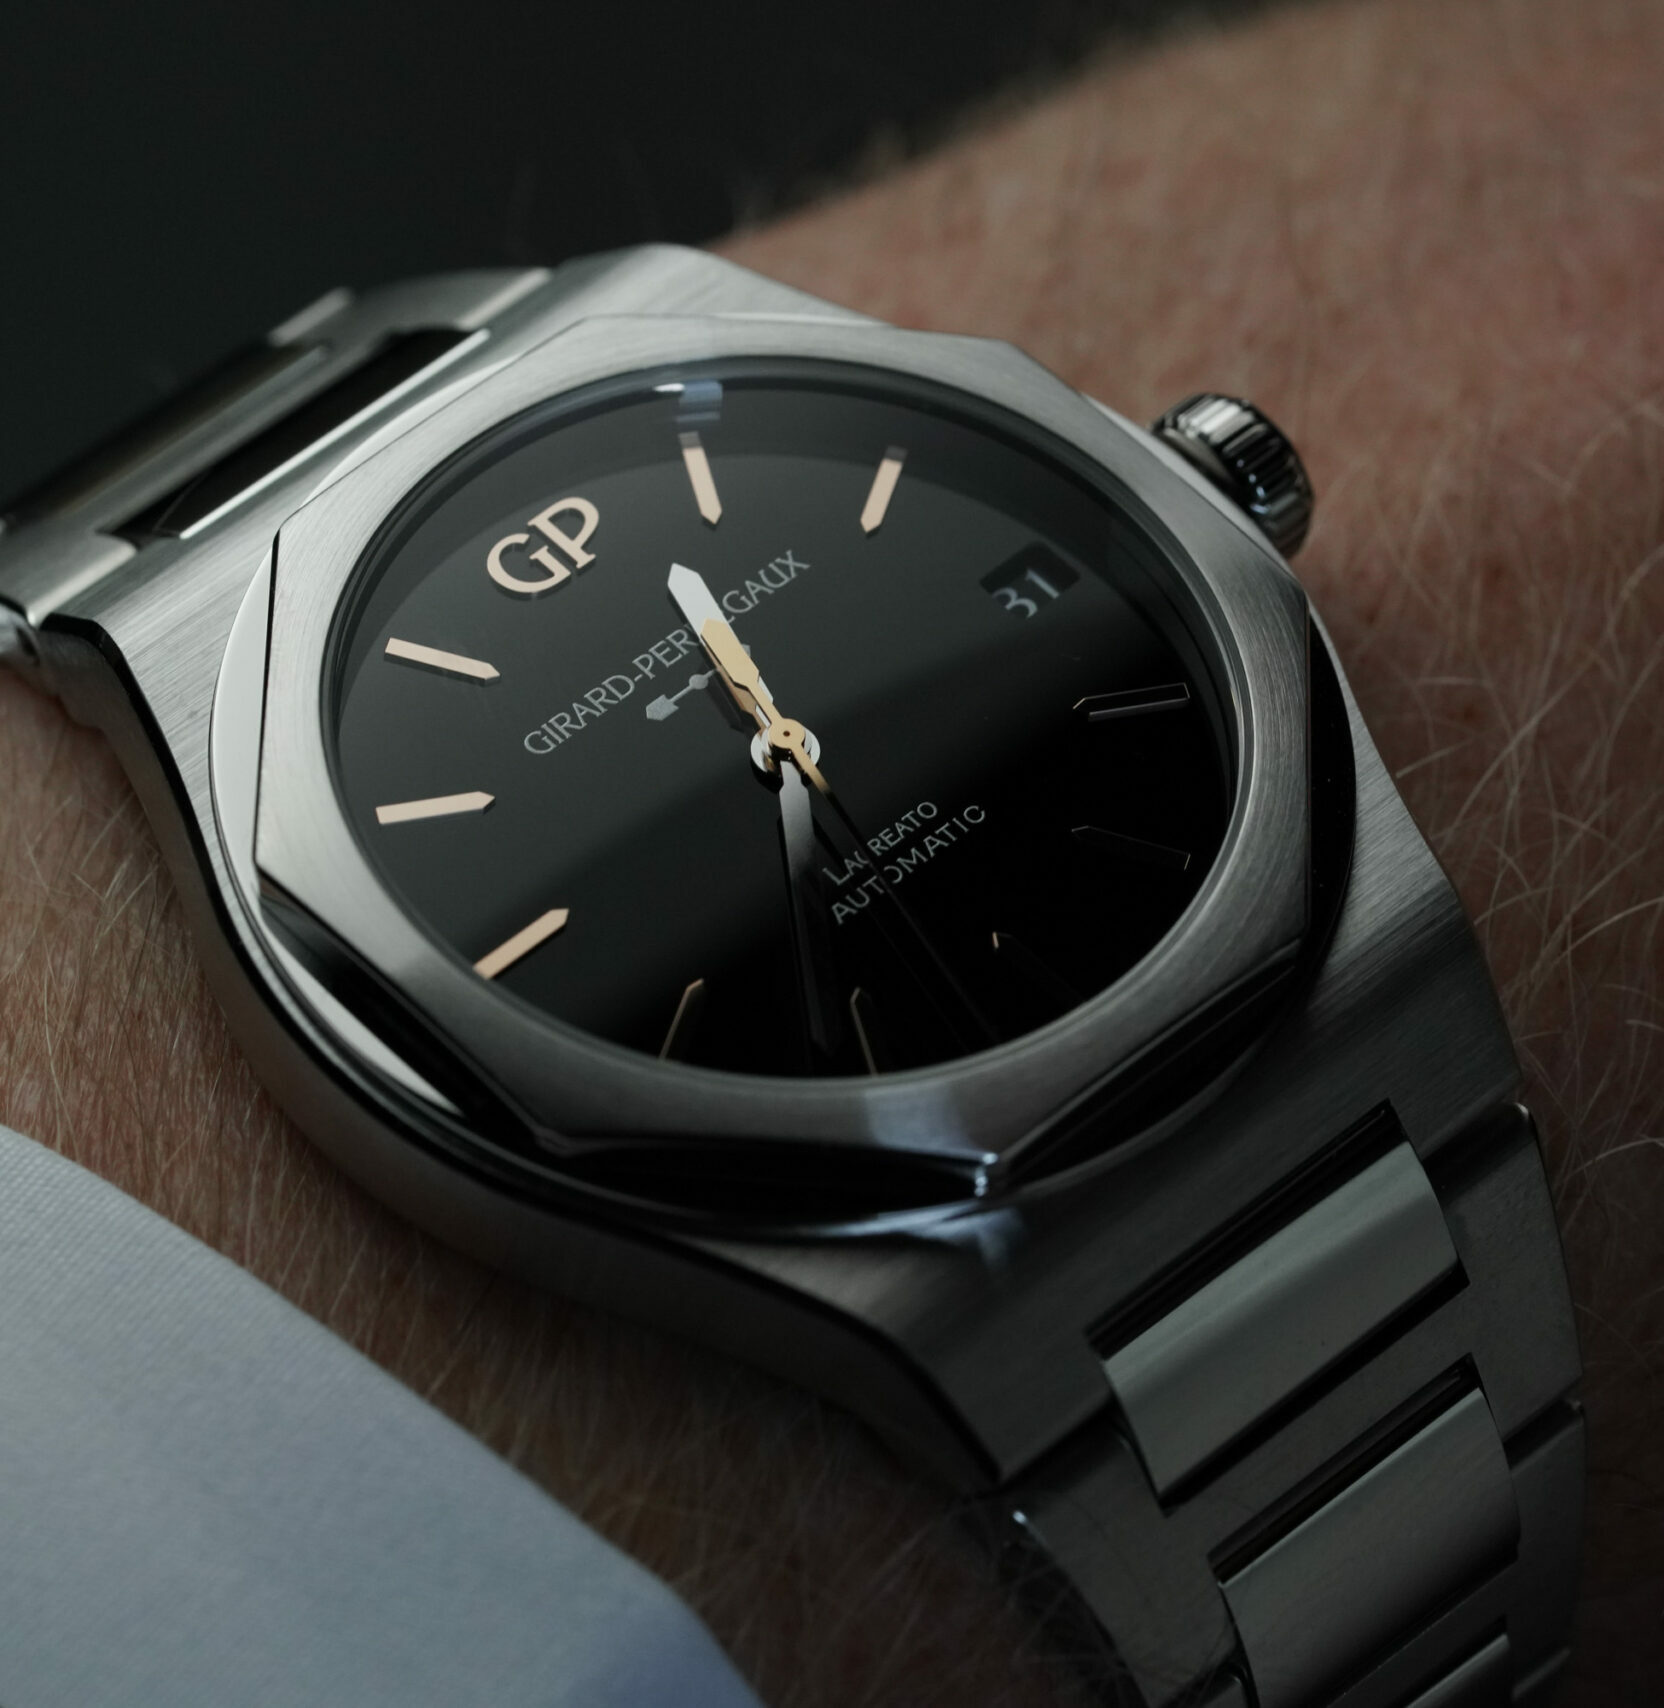 Dialled Up: Six watch dial finishes that will change the personality of your watch